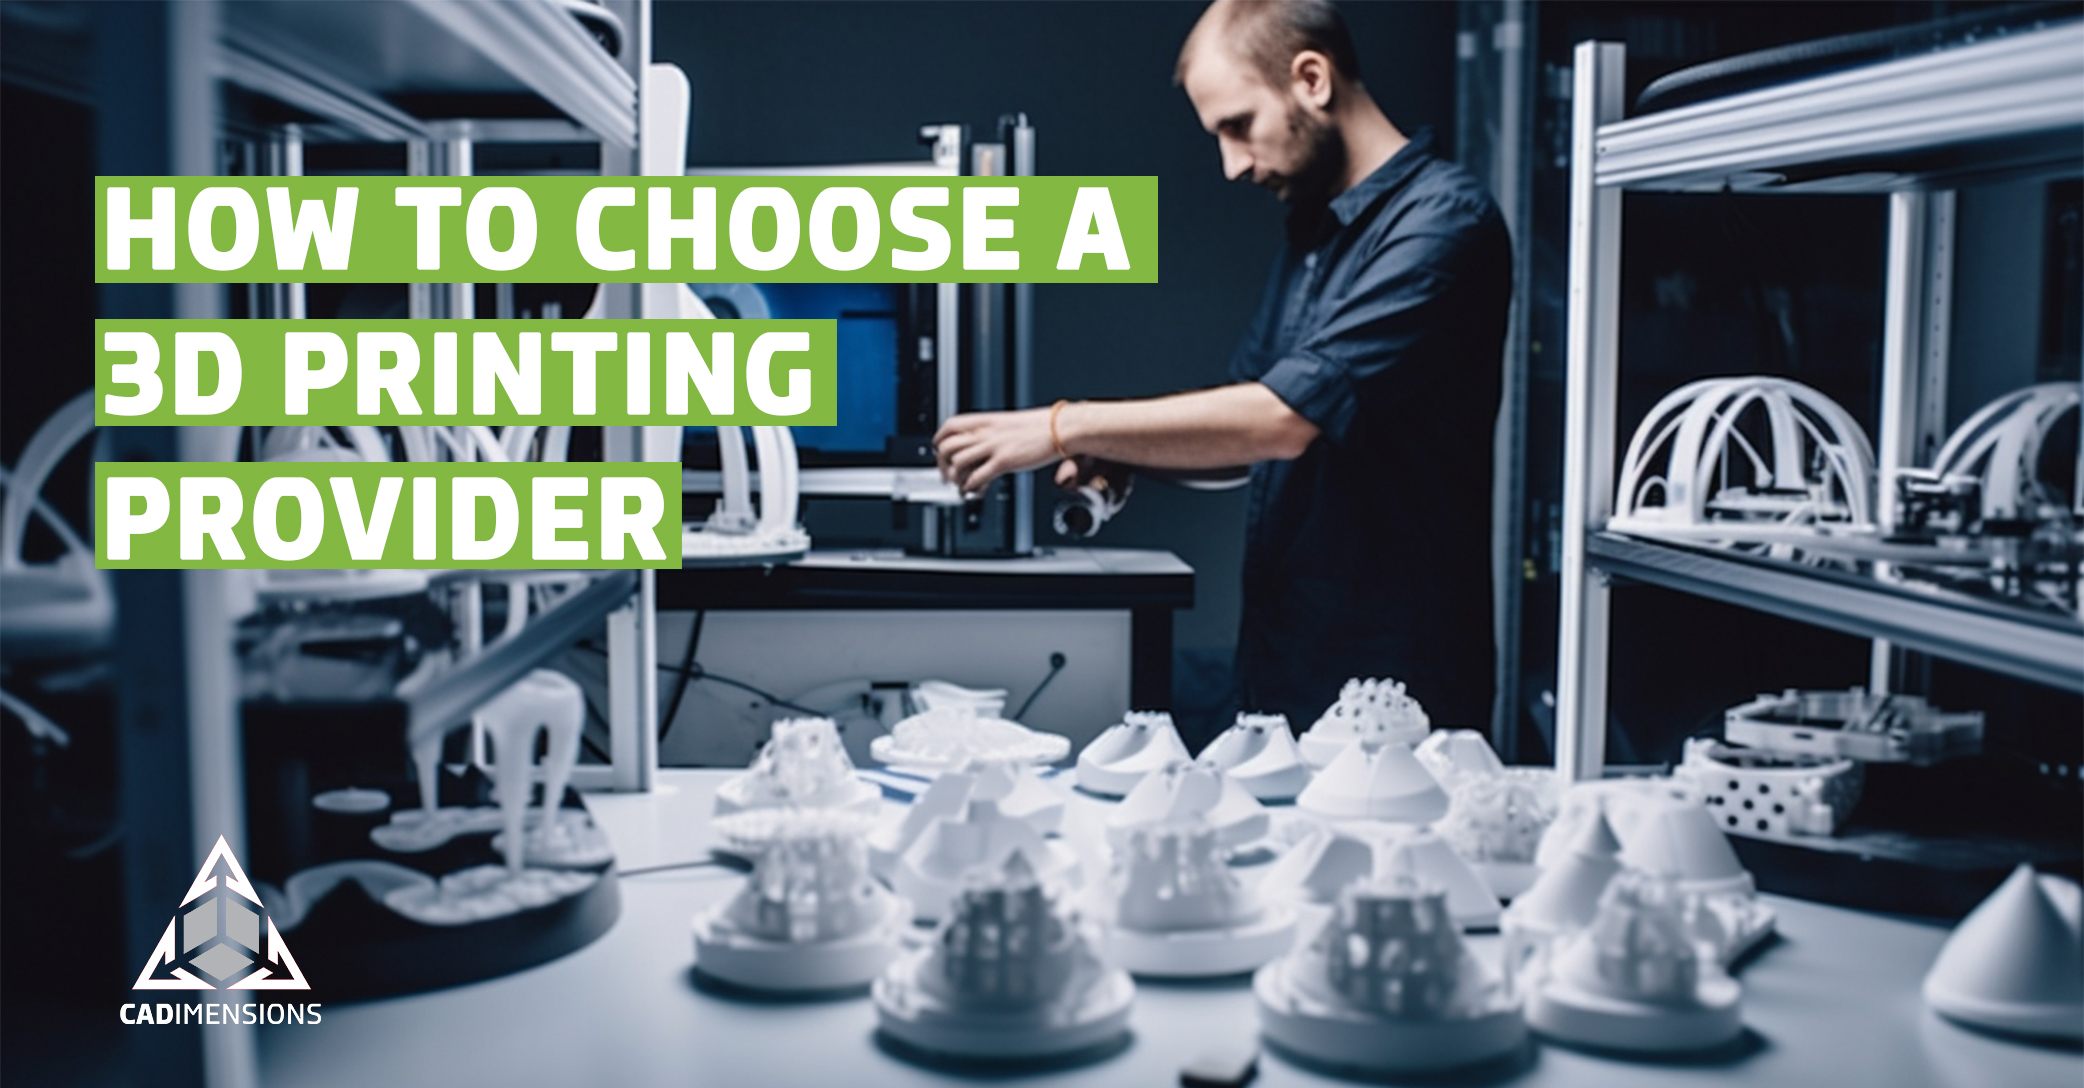 How To Choose the Right 3D Printing Service Provider for Your Business